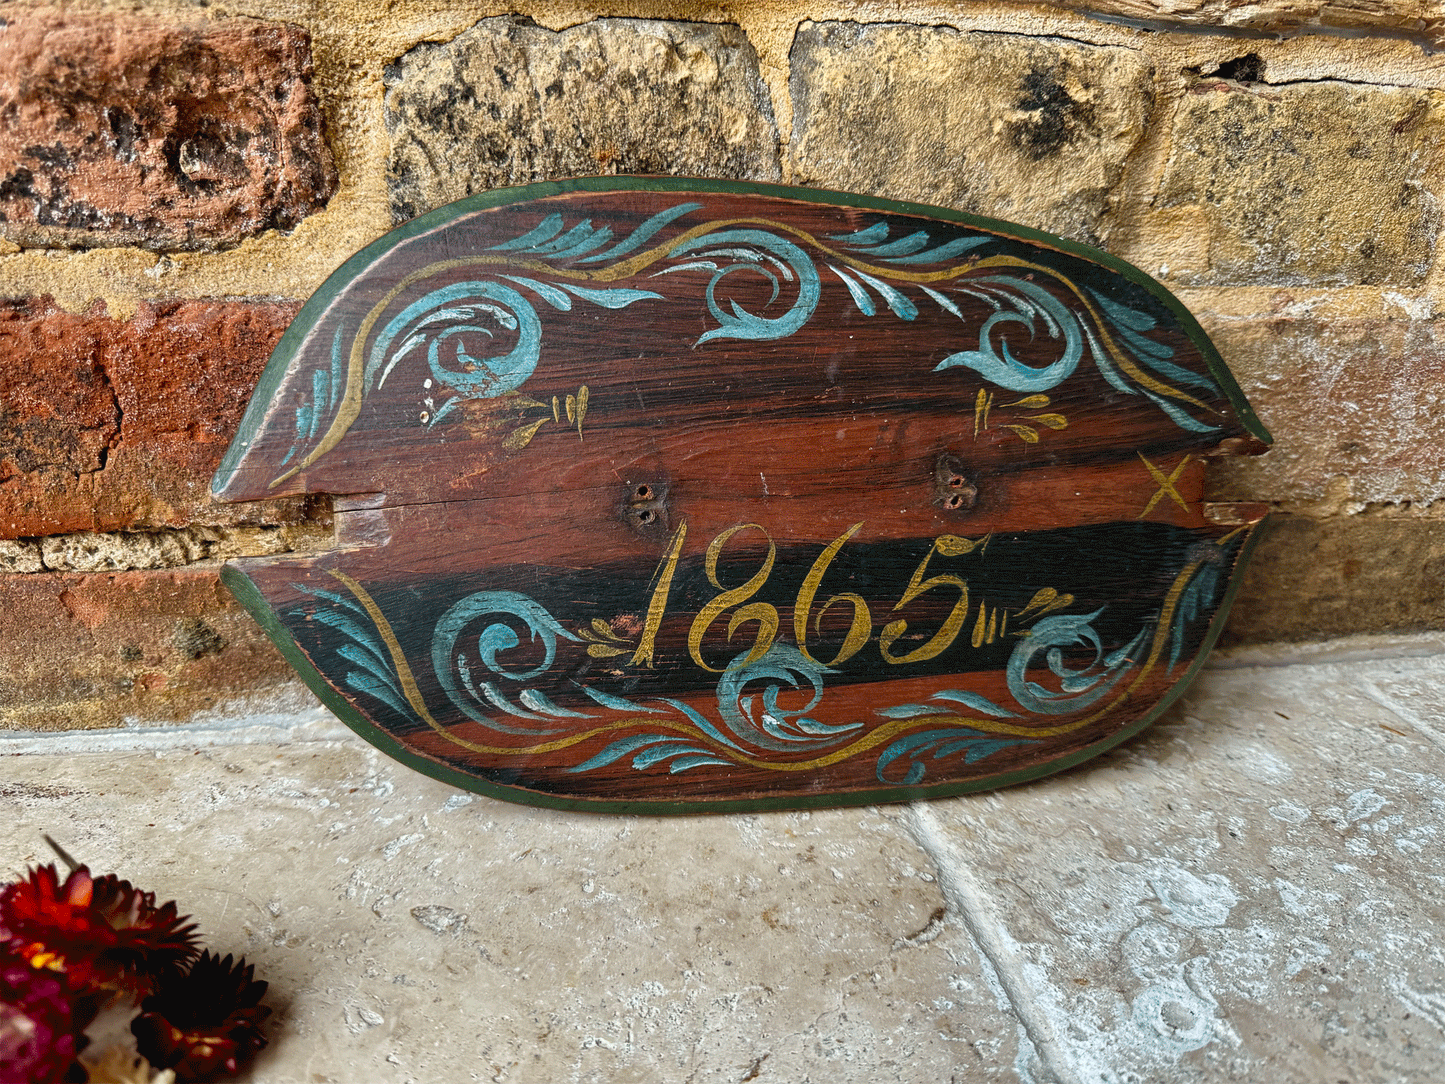 atique 19th century swedish folk art hand painted marriage chest crate box plaque